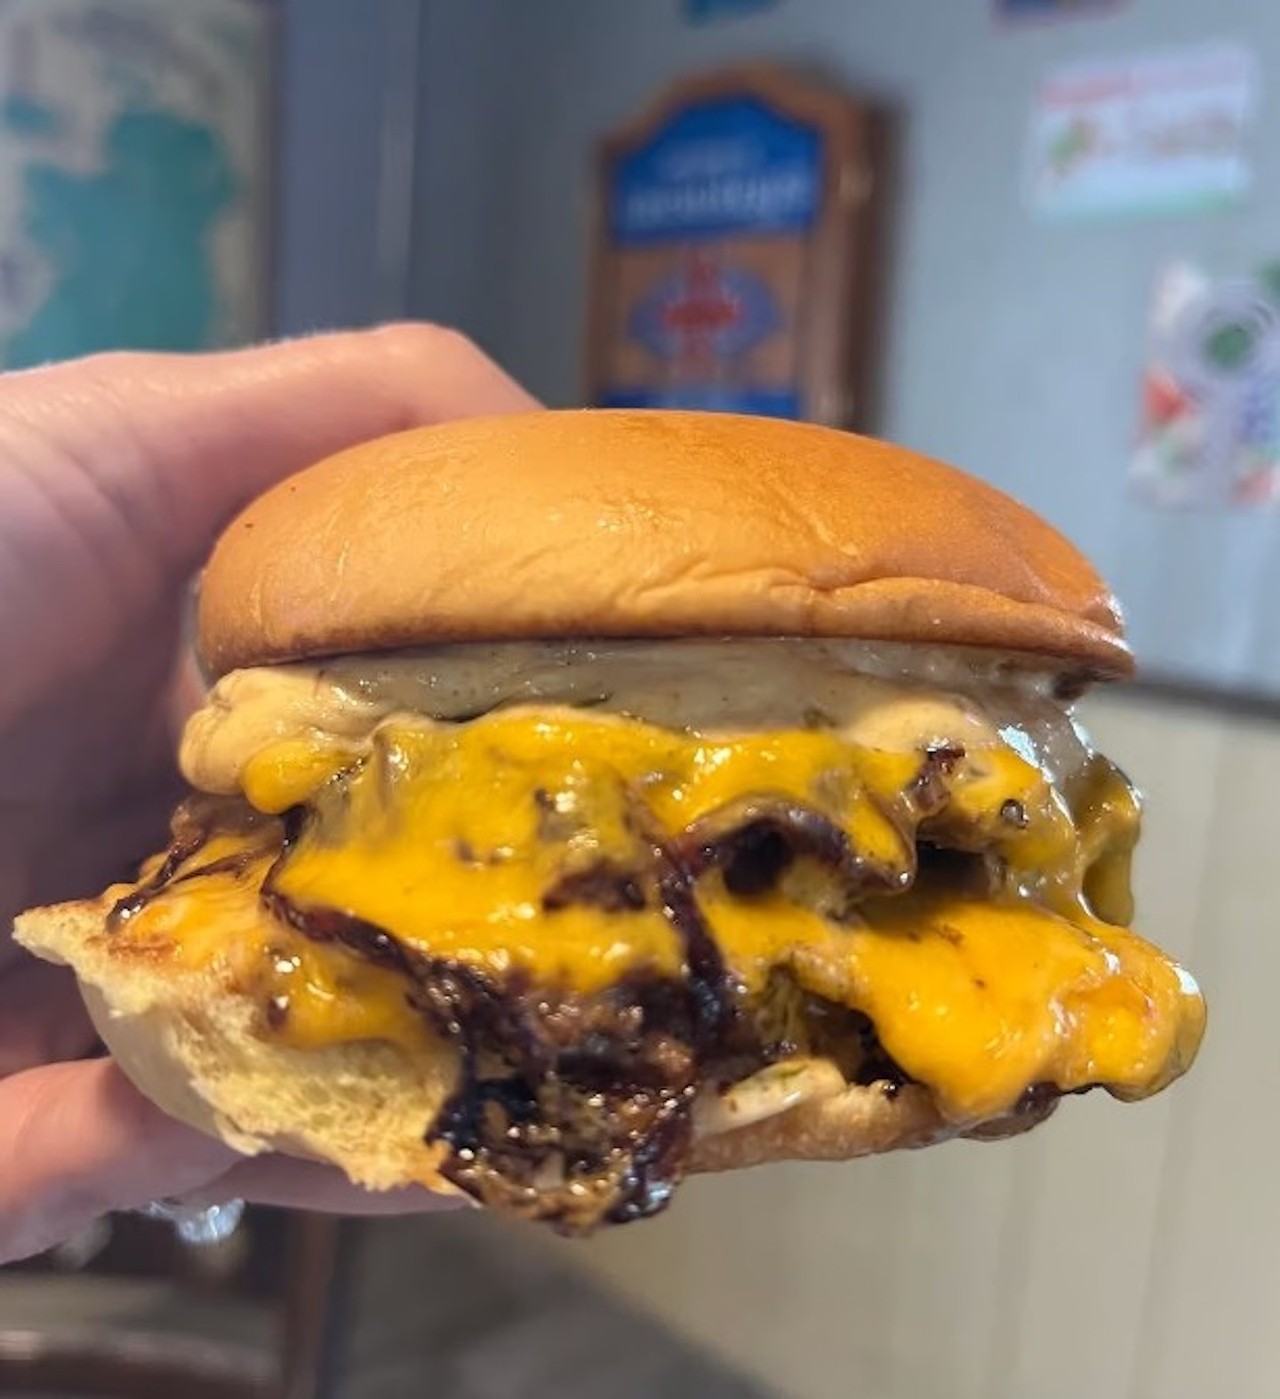 CROWLEY’S
Double Smash Burger:  Proprietary blend of short rib, brisket and chuck. Double patty, government cheese, iceberg lettuce, sautéed onion, burger sauce, martin’s potato roll – voted Cleveland.com’s best burger in greater Cleveland!
BREW KETTLE SPECIAL: $13 for a Burger and Brew Kettle Beer.